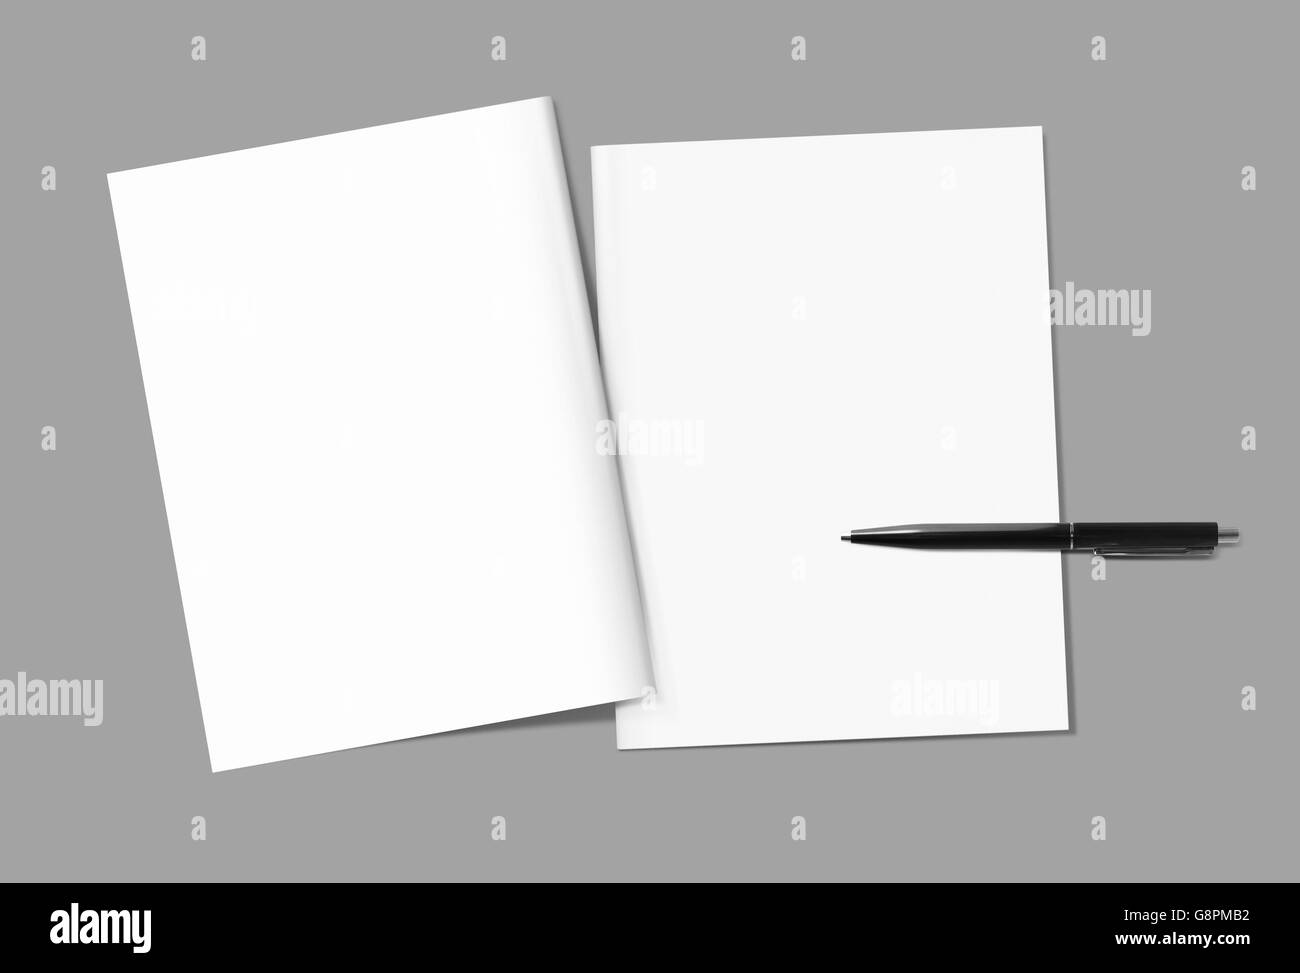 Blank magazine covers and pen template on gray background. Stock Photo